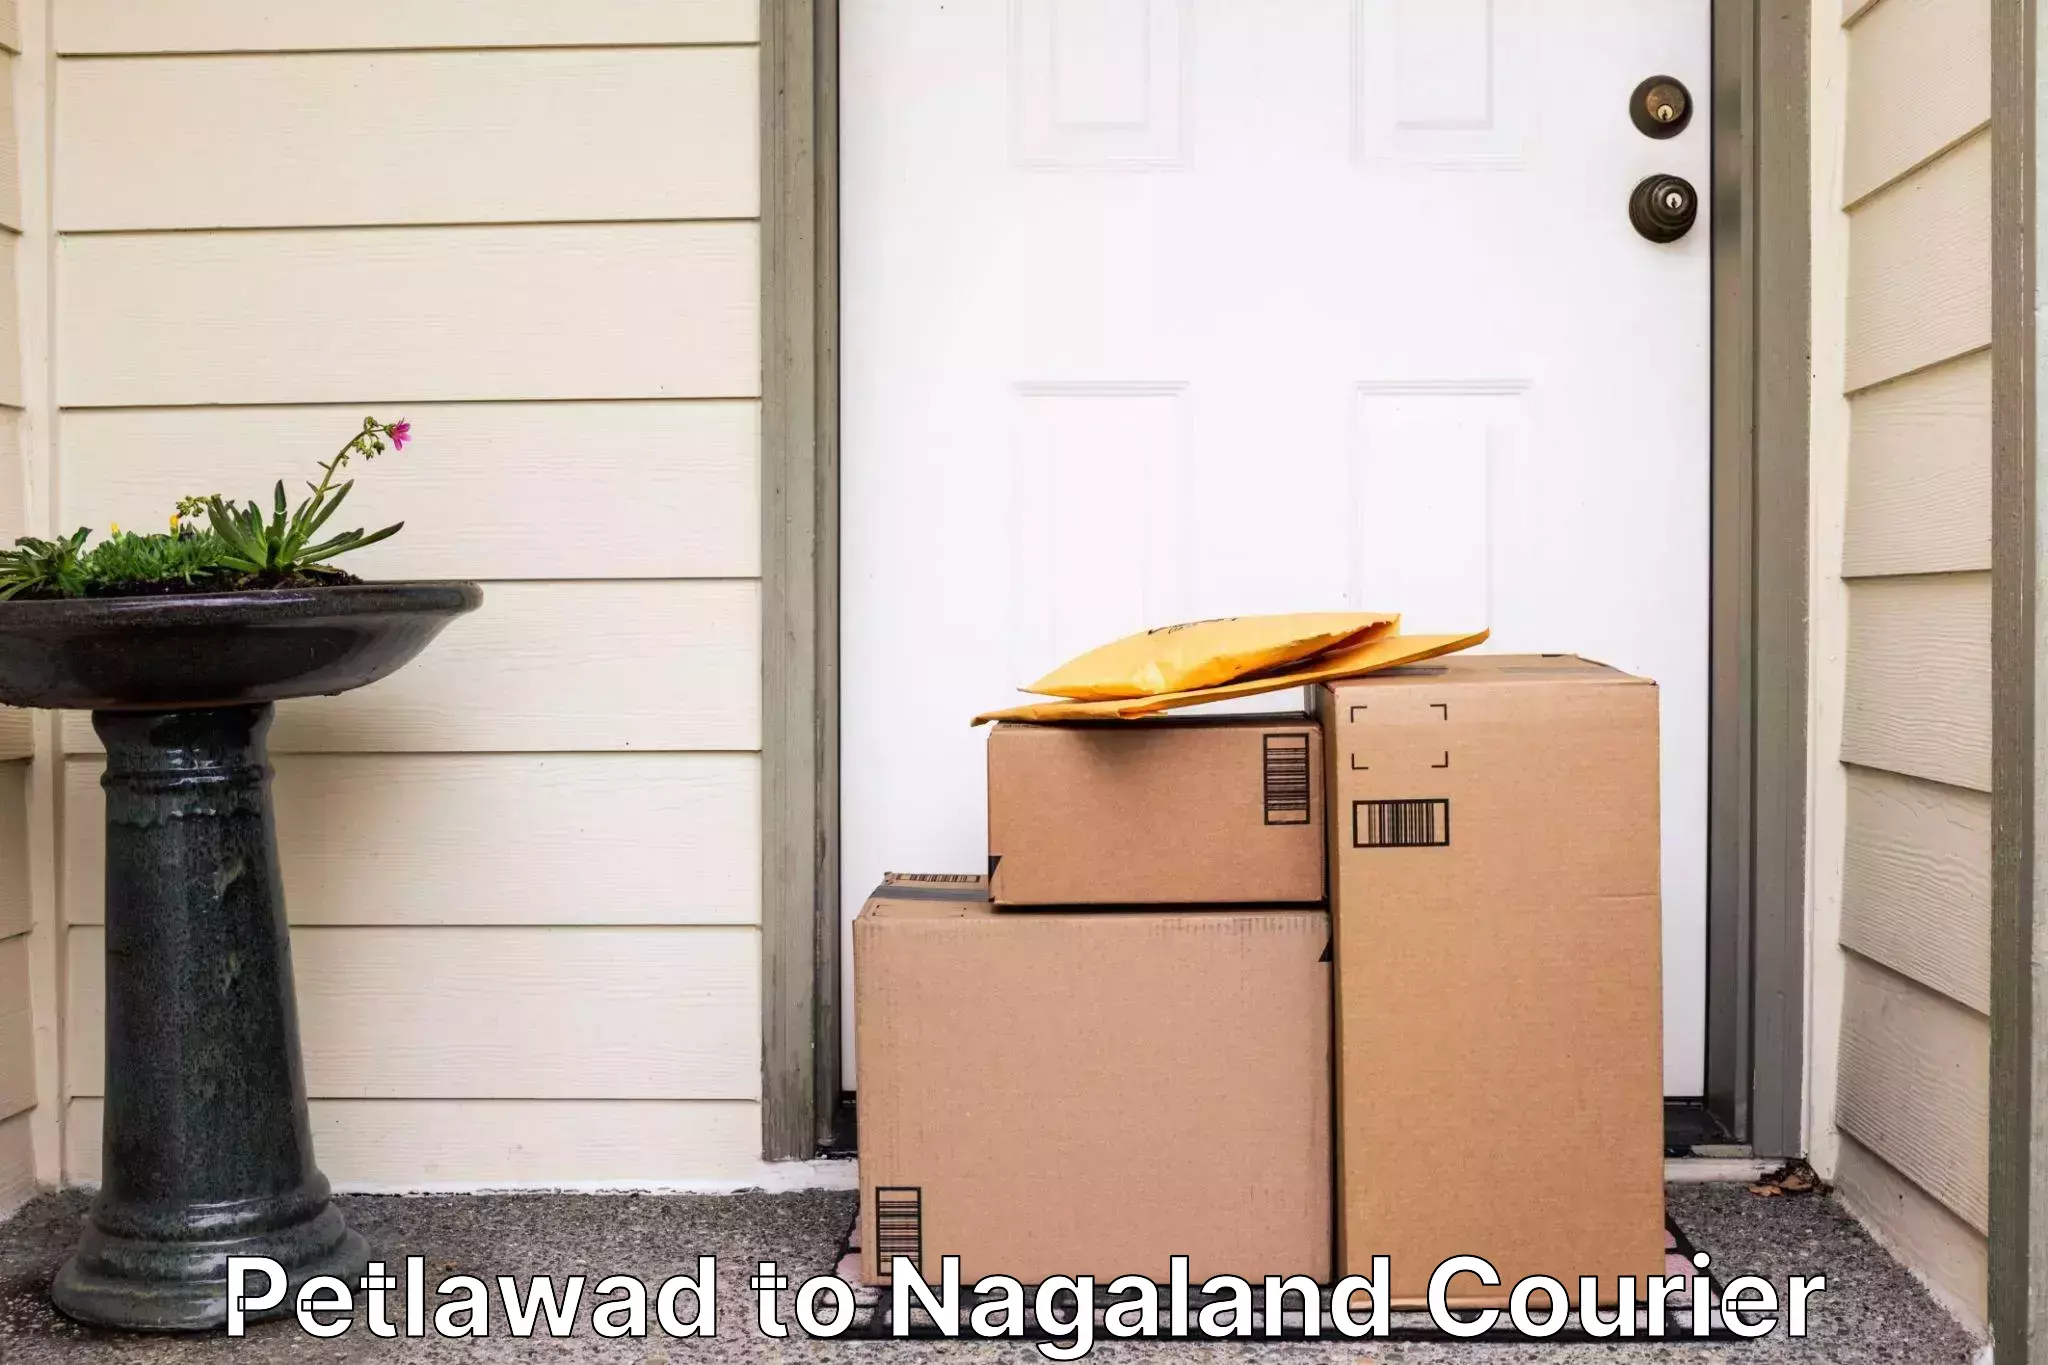 Sustainable delivery practices in Petlawad to Nagaland